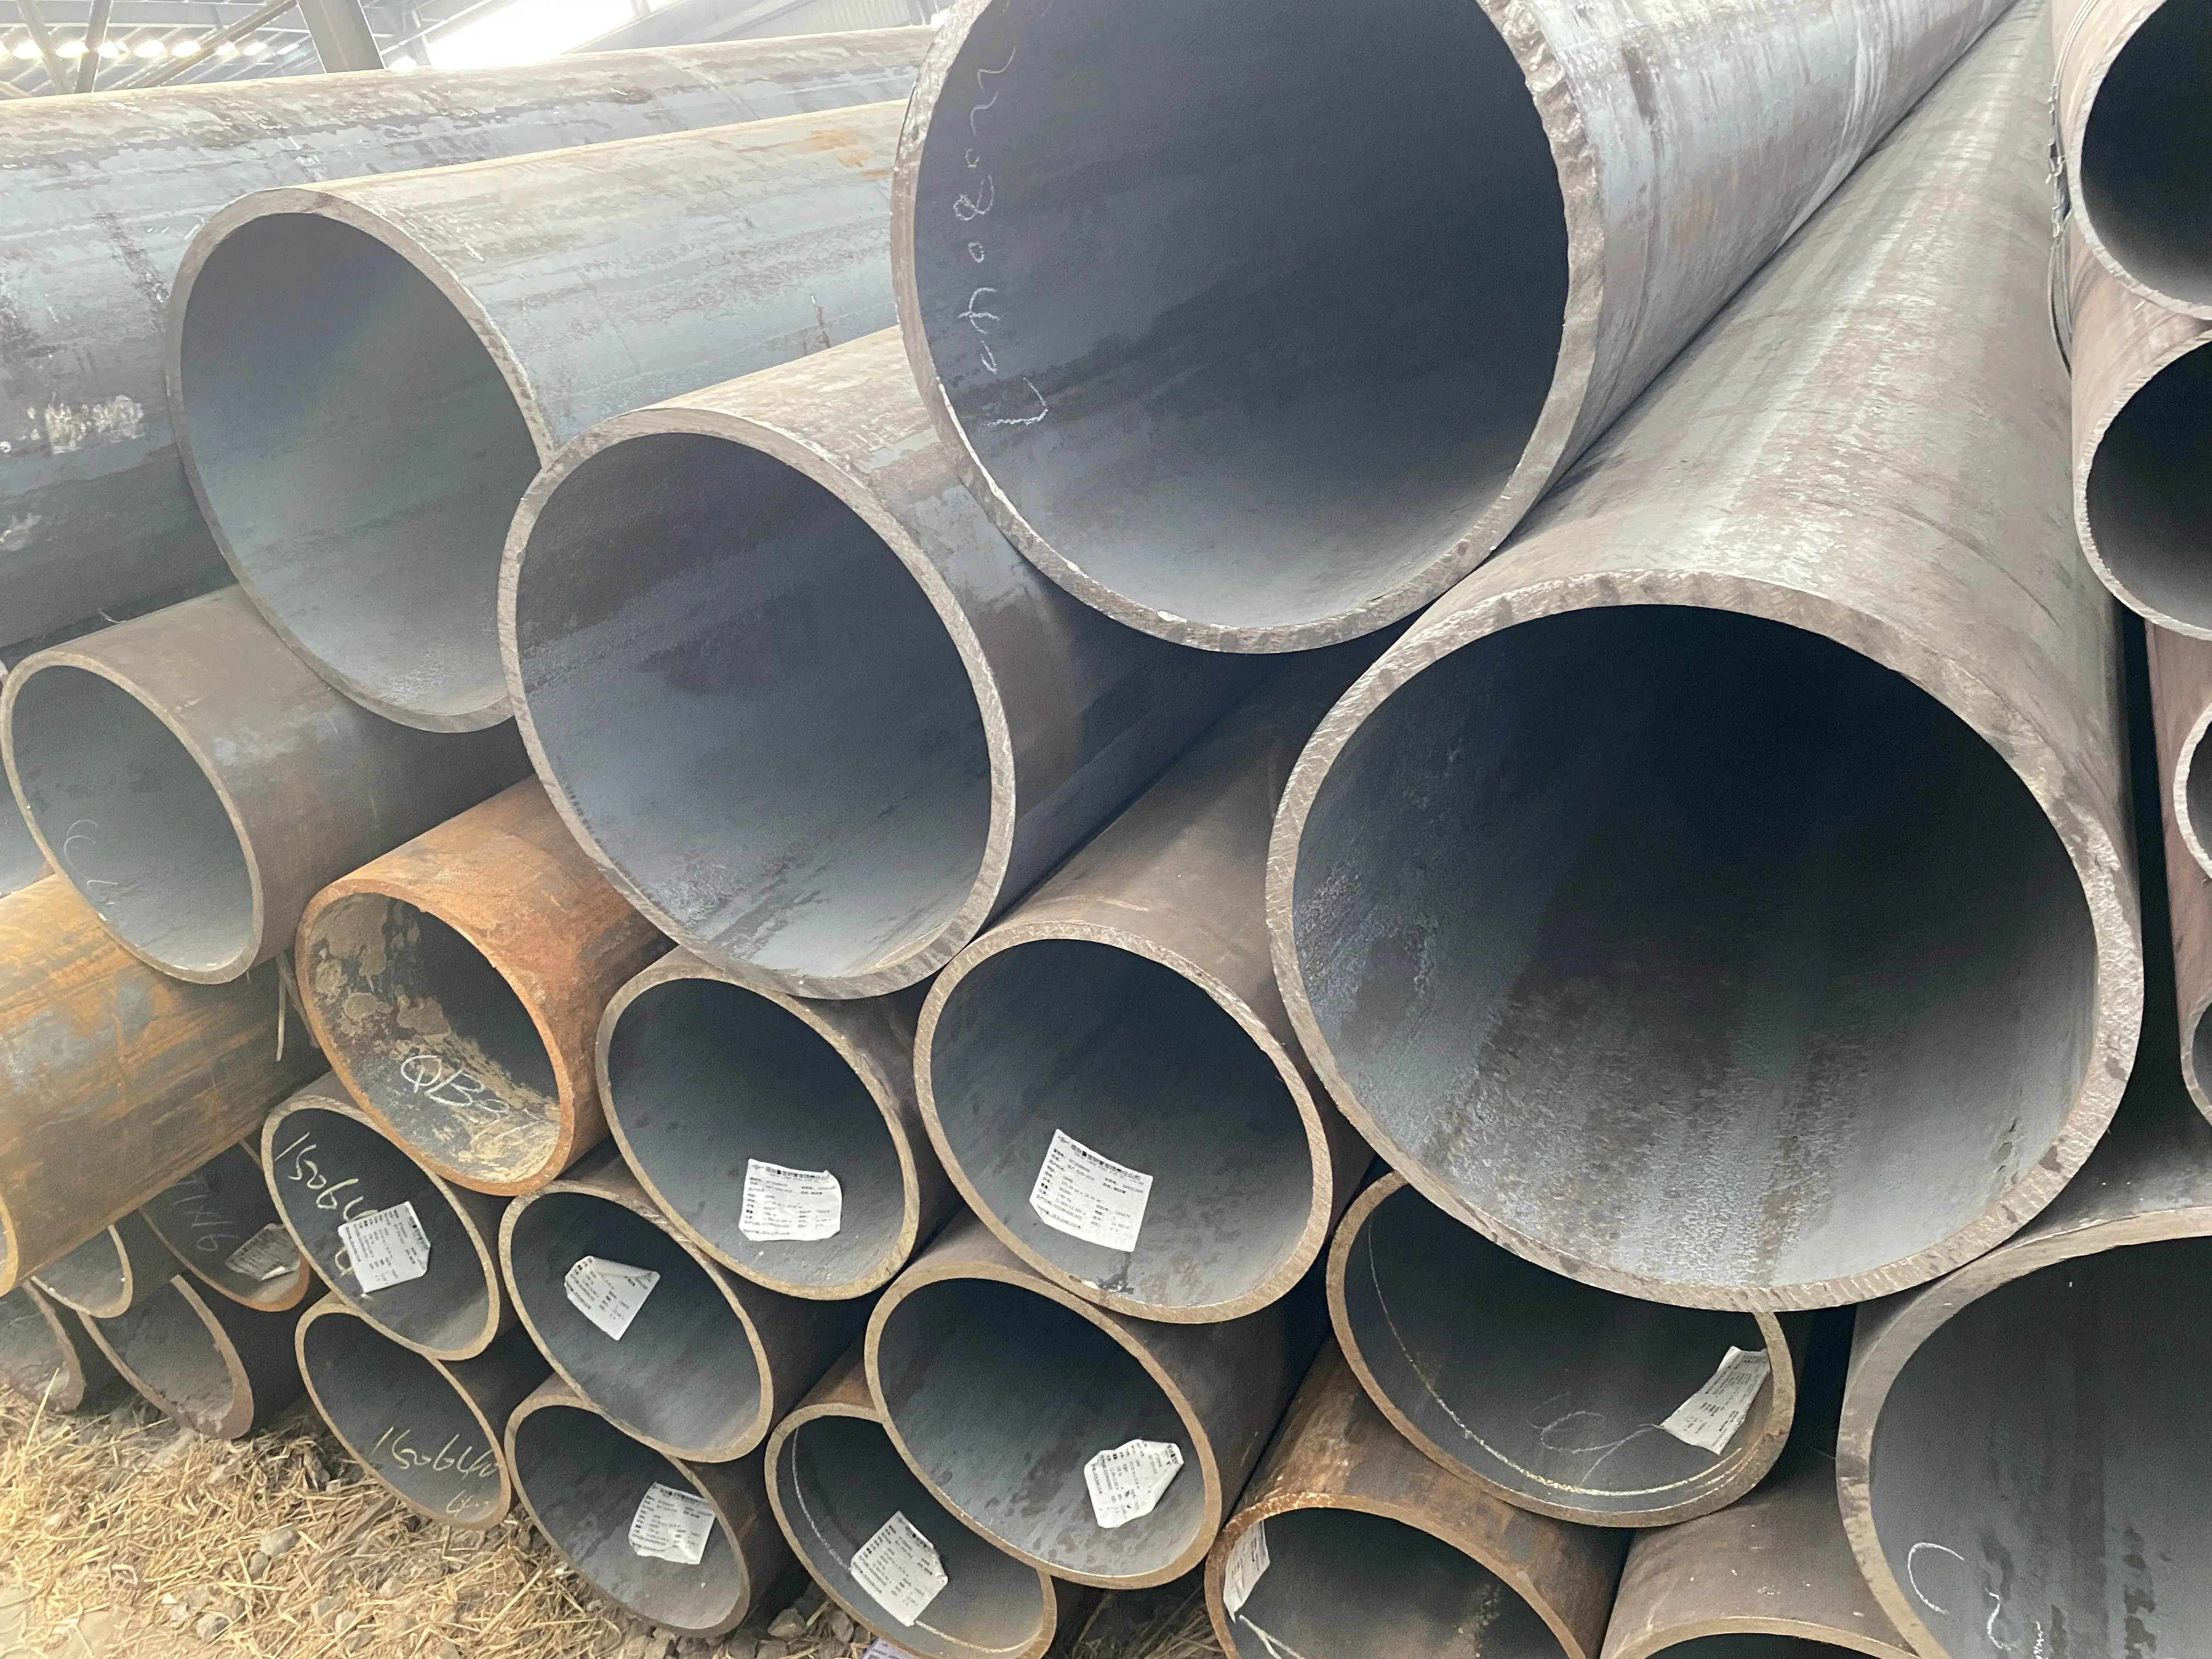 ASTM A53 A106 API 5L GR.B Seamless Carbon Steel Pipe With Reasonable Price